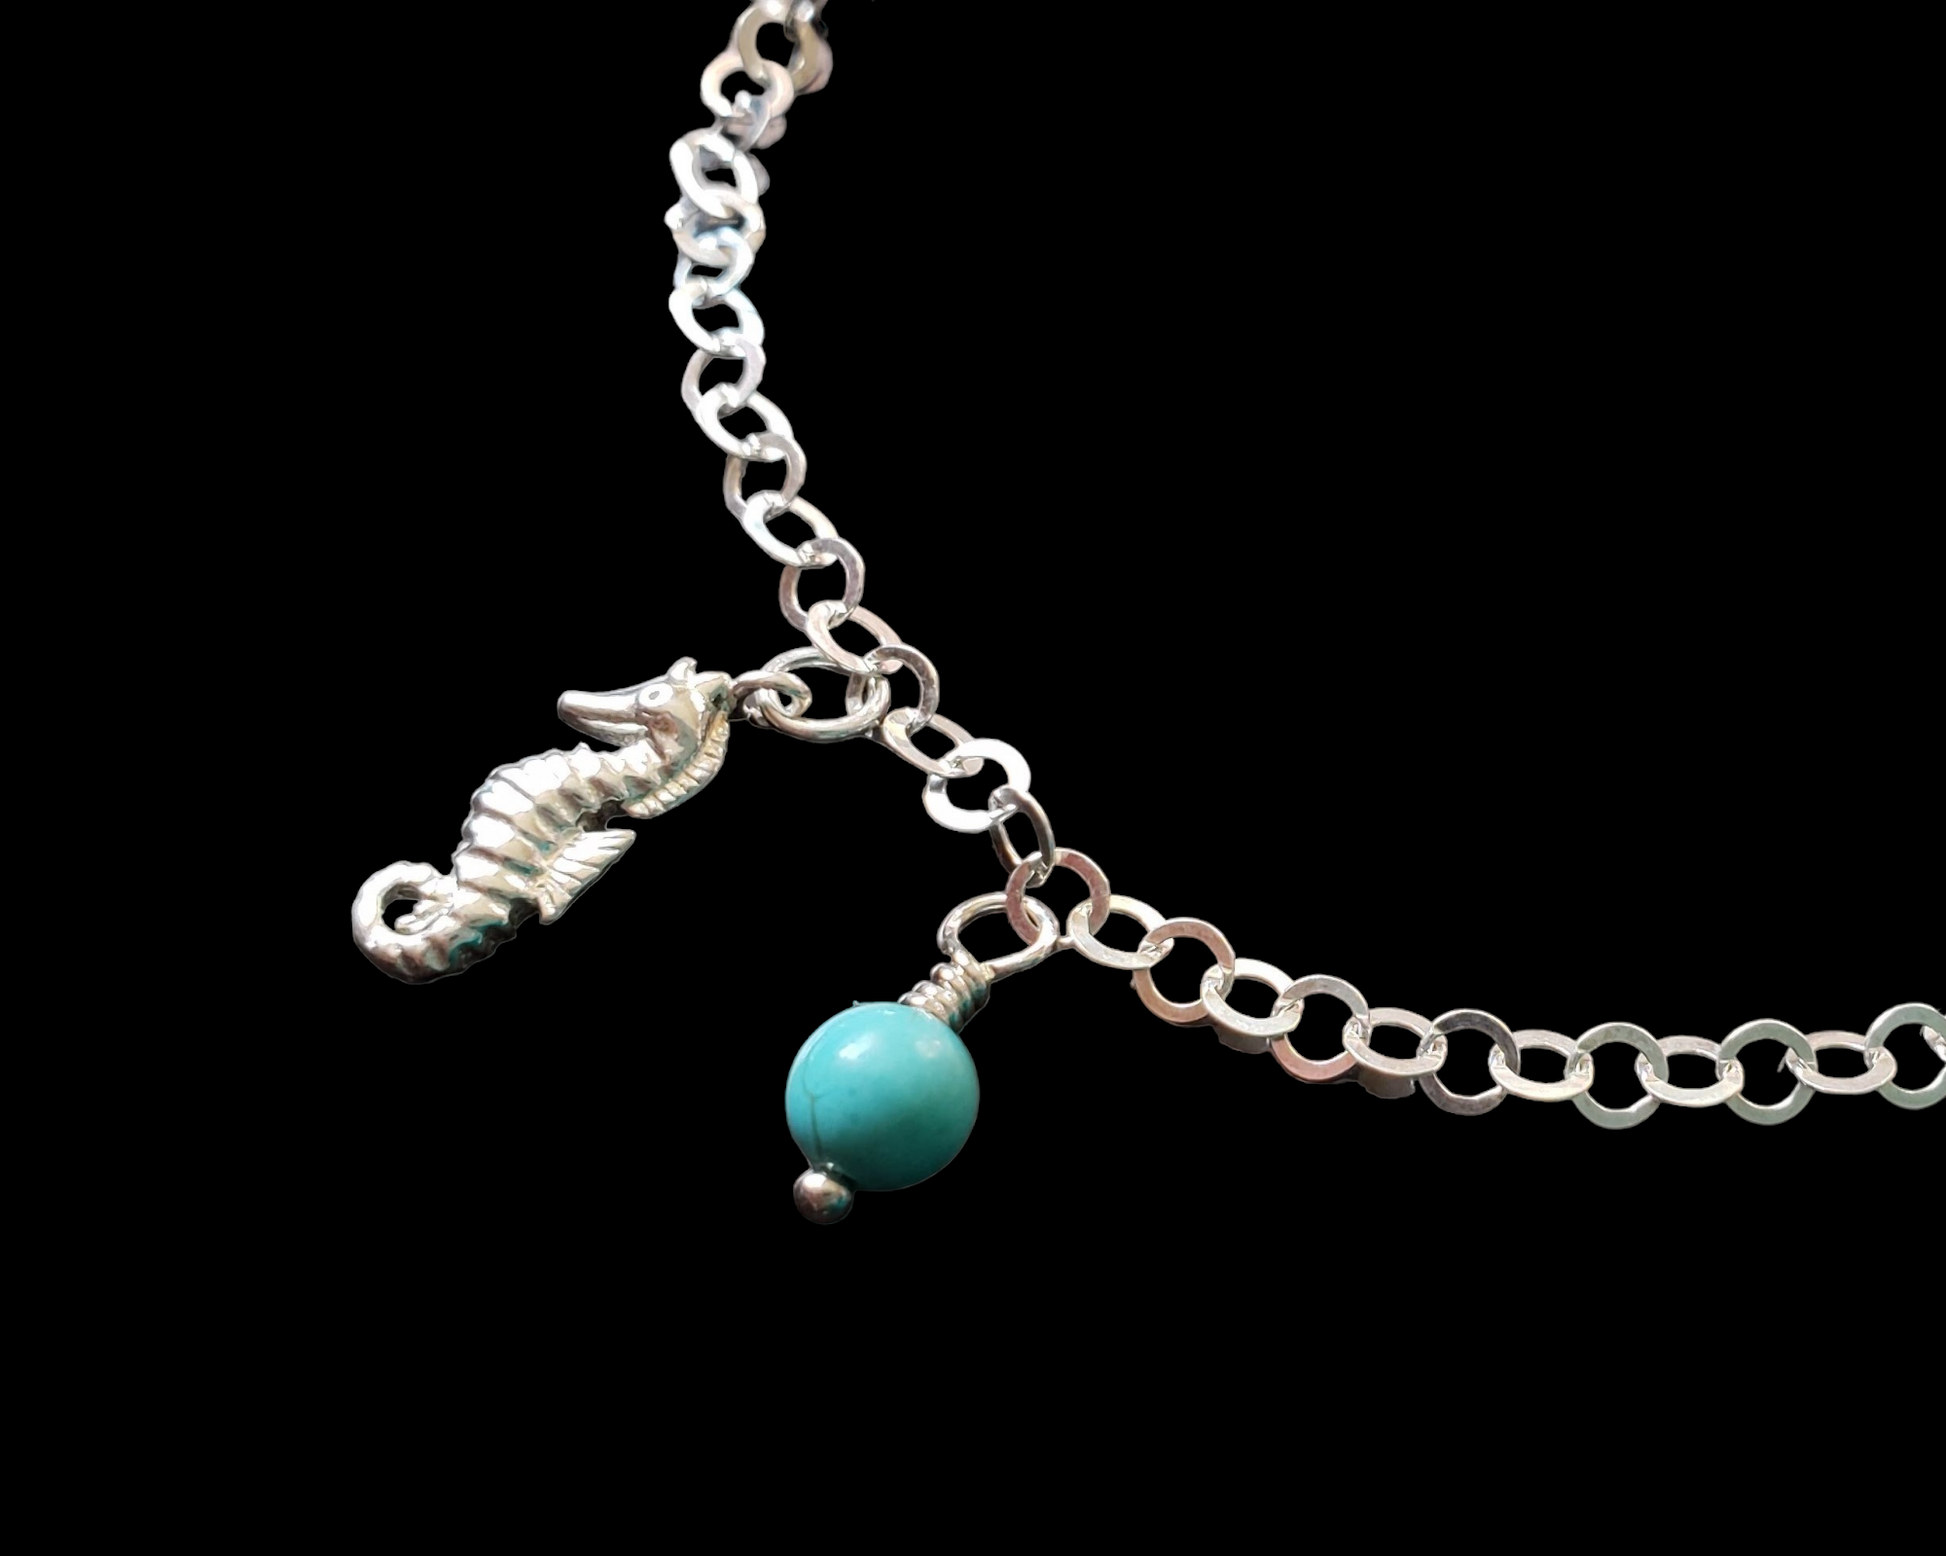  Deluxe Personalized Seahorse Birthstone Eternity Anklet-Ankle Bracelet, Chain and Charm style anklet